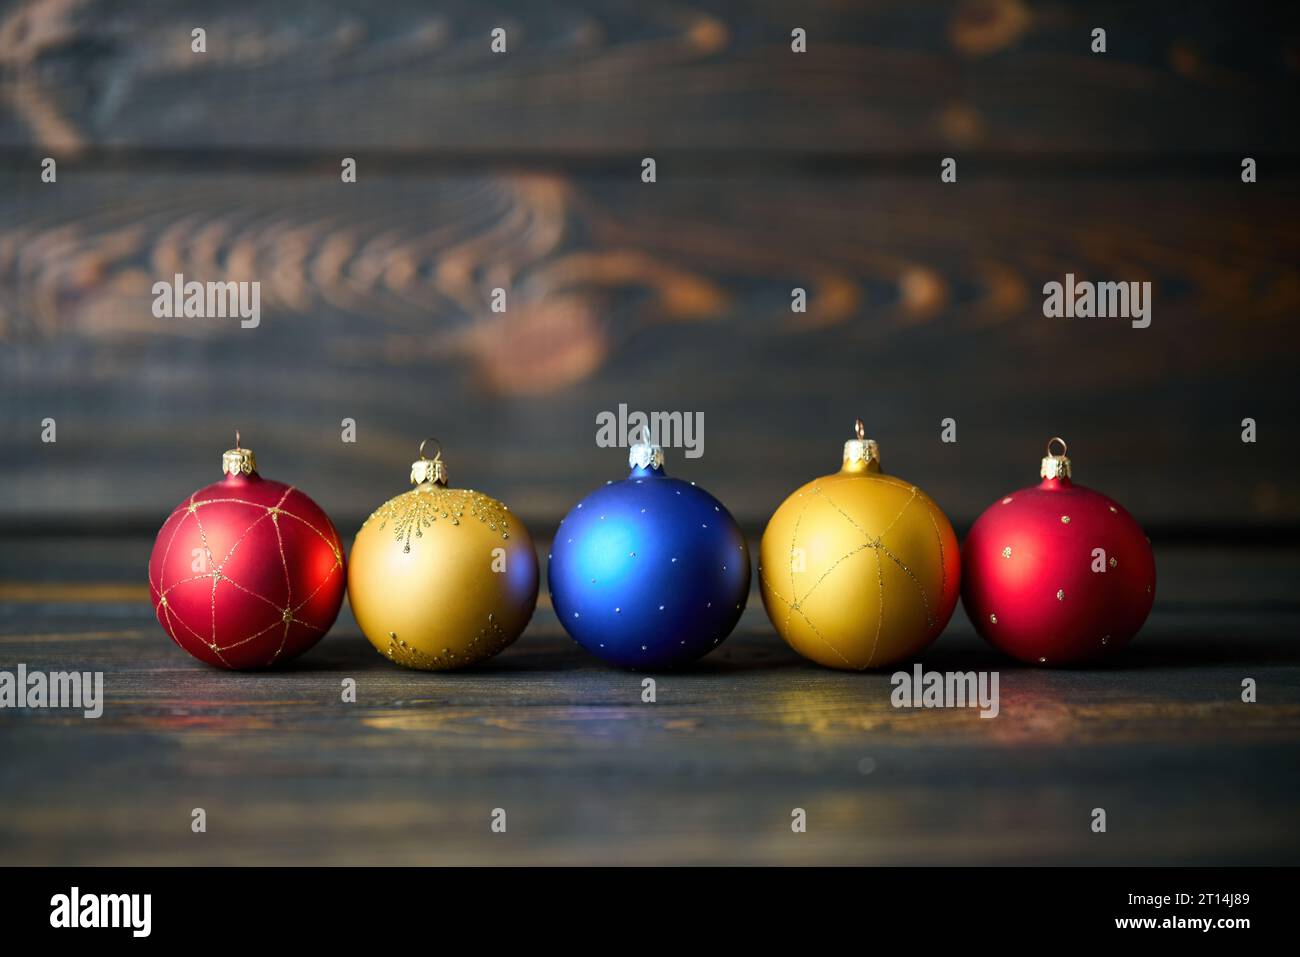 Christmas celebration holiday background. Colorful Christmas balls Christmas baubles on wooden background with copy space Stock Photo